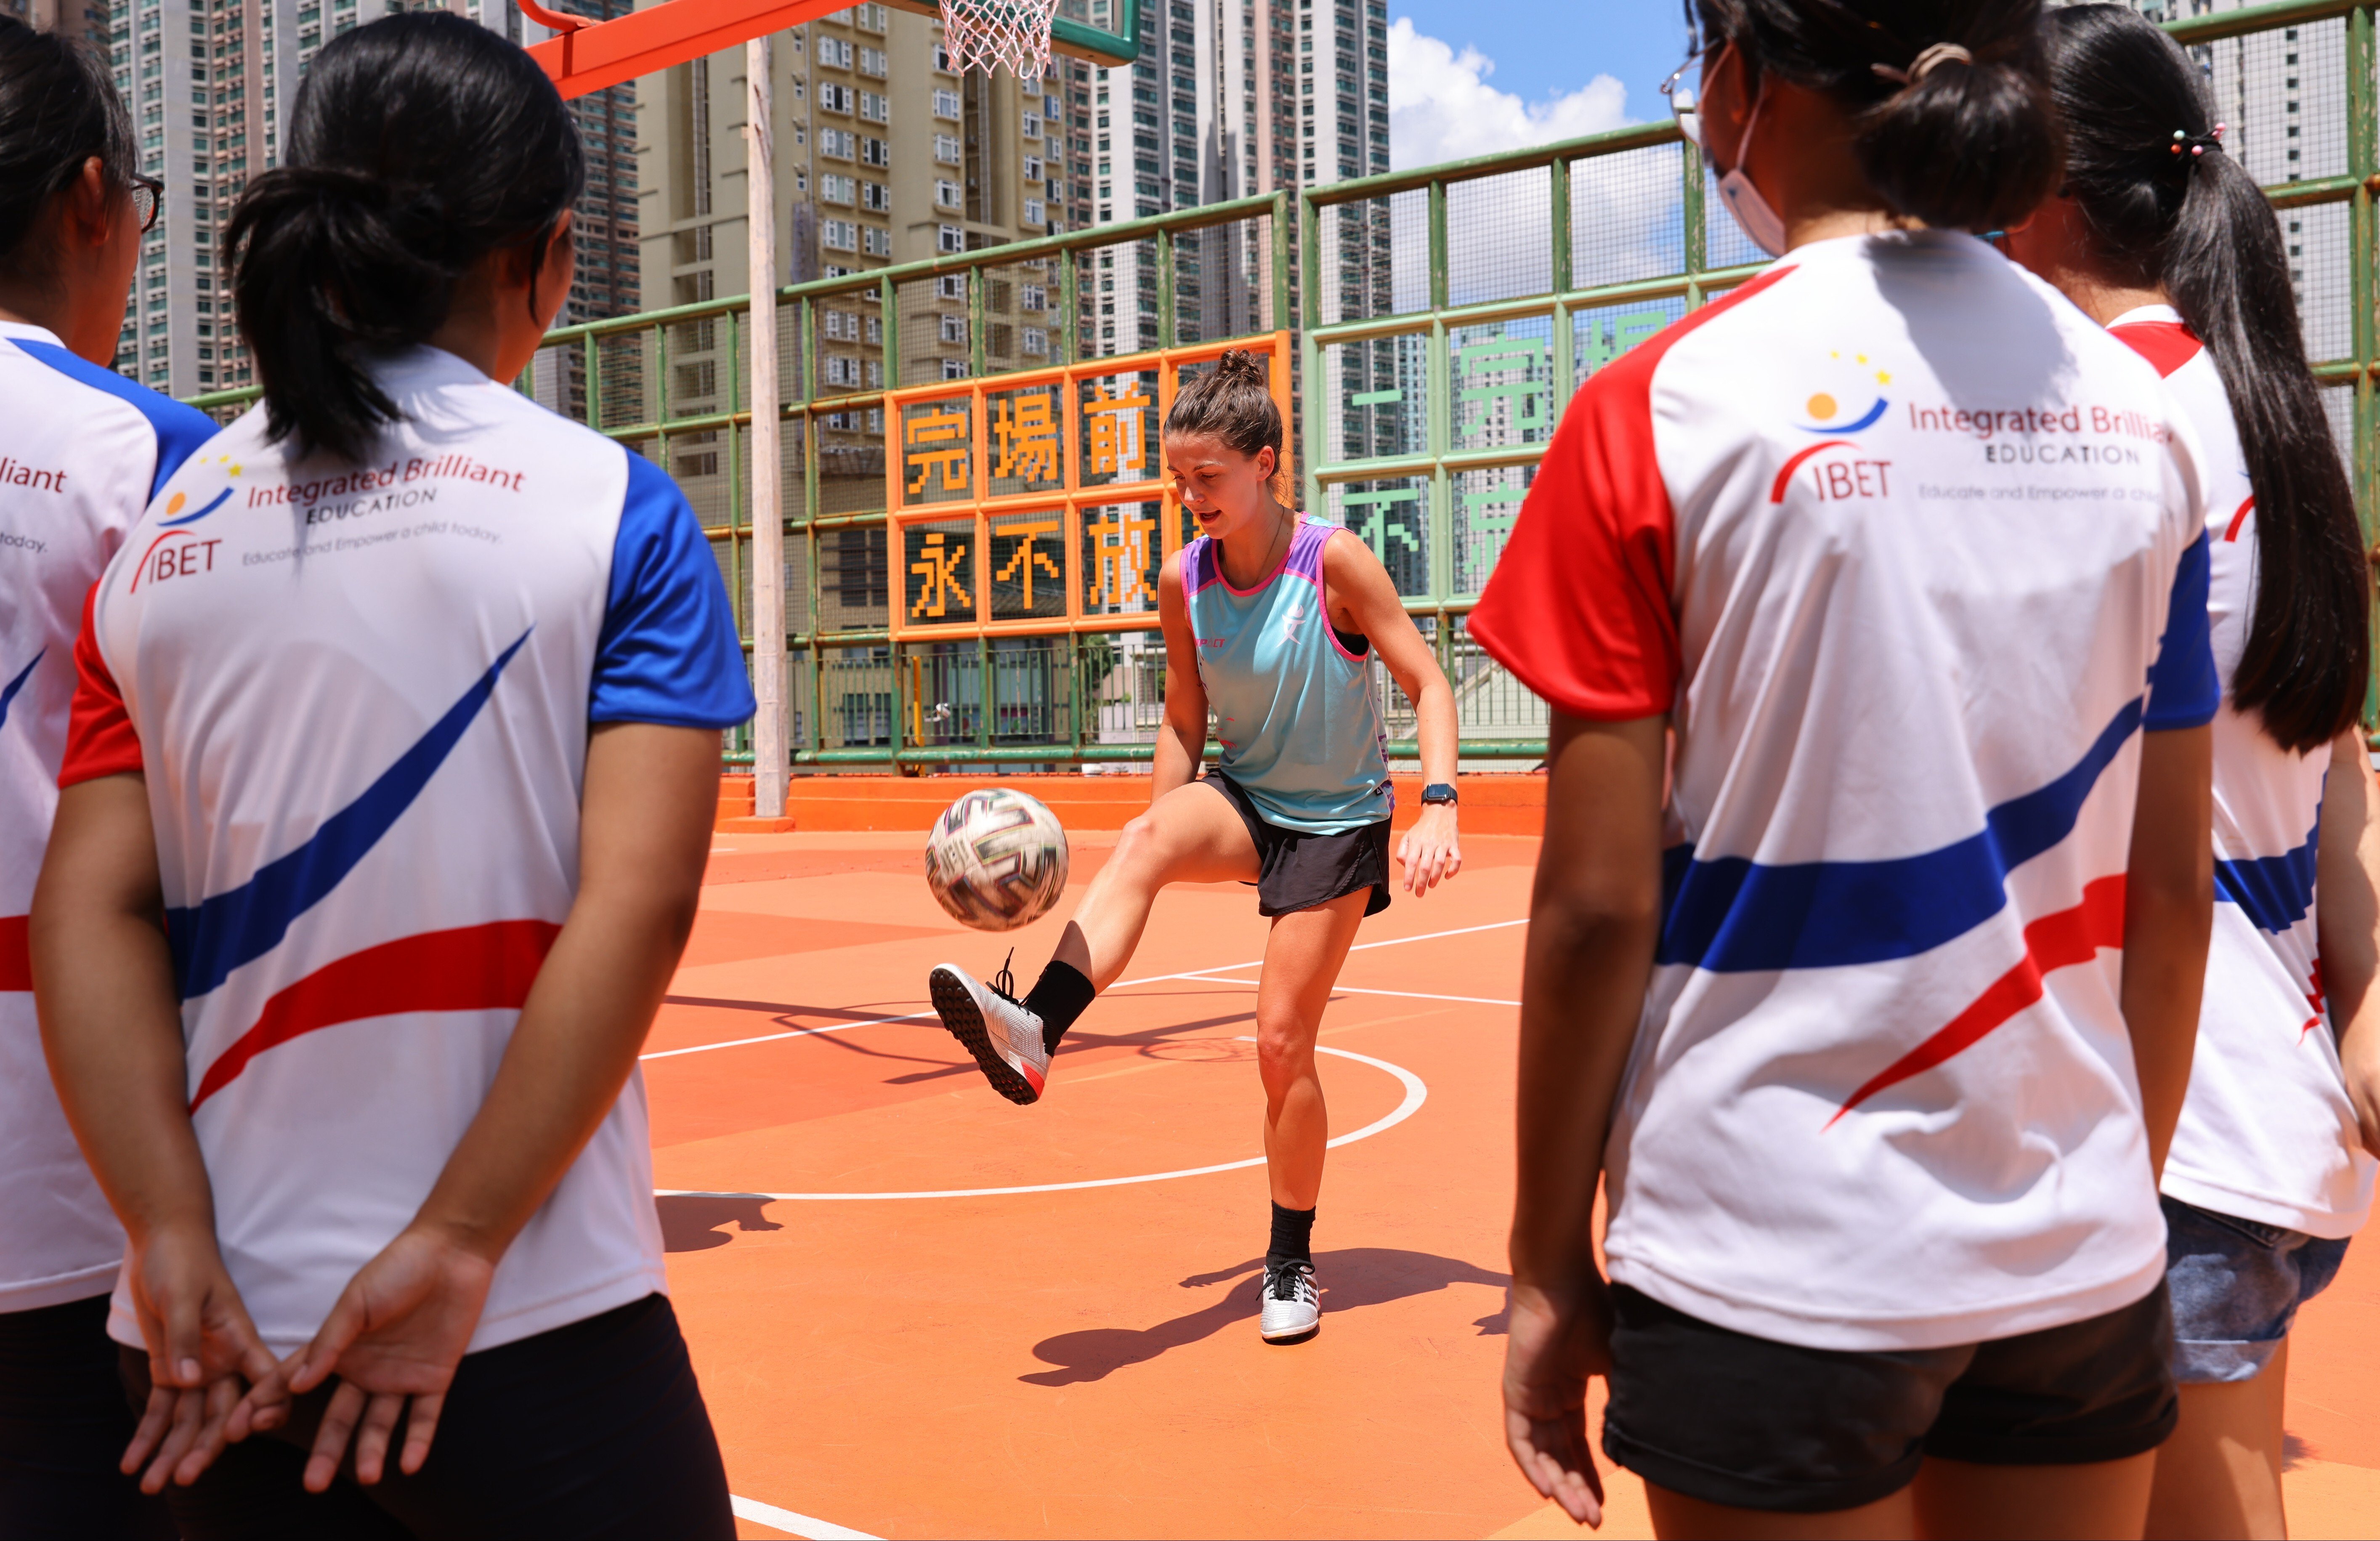 WISE HK (Women In Sport Empowered Hong Kong) coach and footballer for MLFA, Cecily Radford, teaching students from the Integrated Brilliant Education Limited (IBEL) school in Tseung Kwan O, Hong Kong. Photo: SCMP/ Dickson Lee